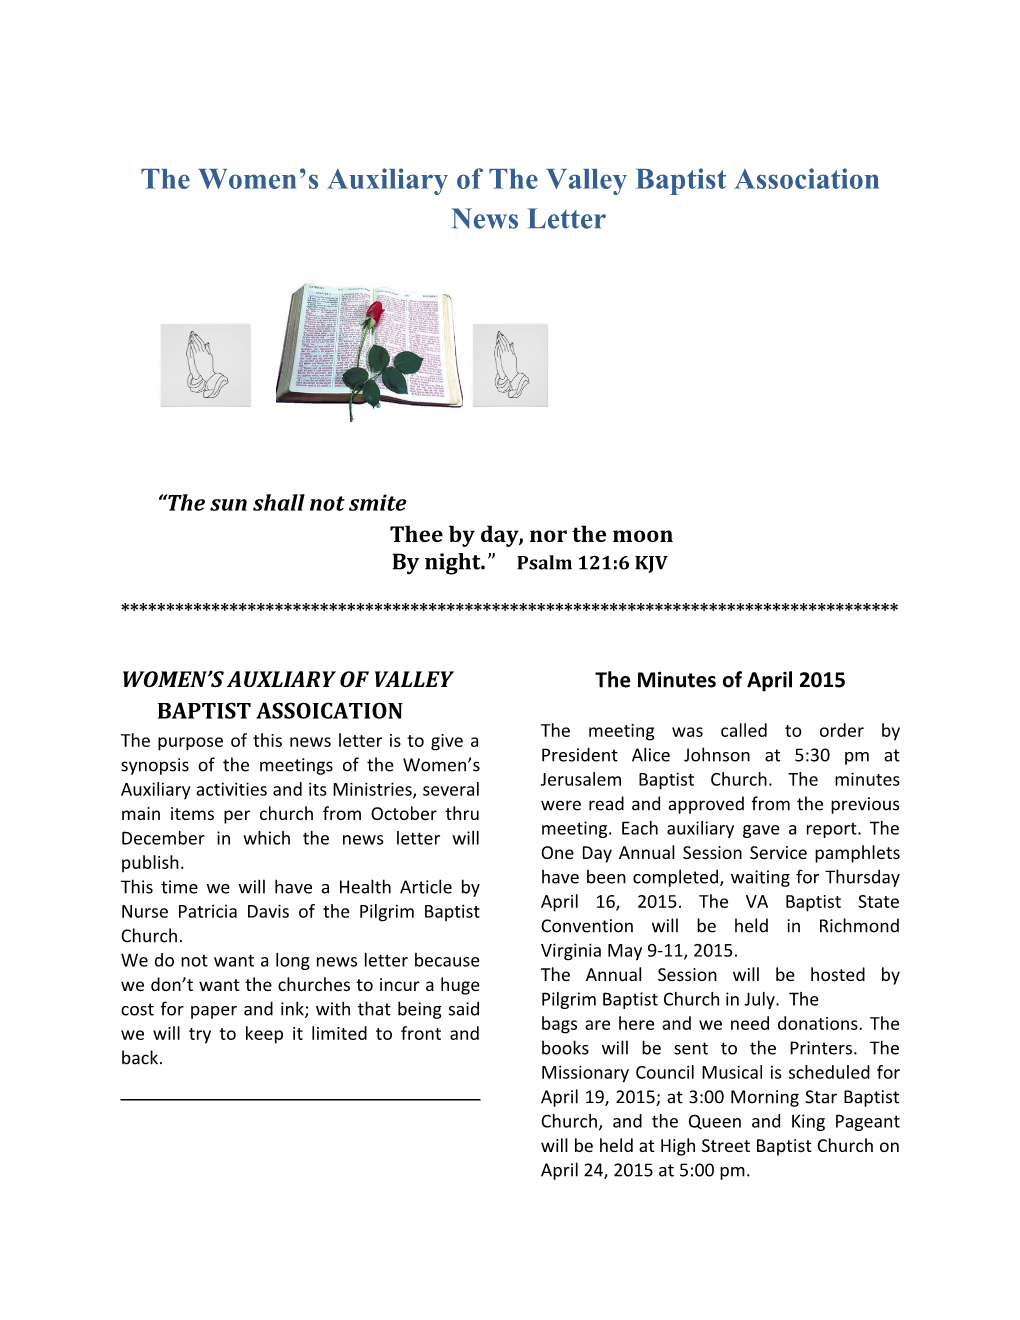 The Women S Auxiliary of the Valley Baptist Association News Letter